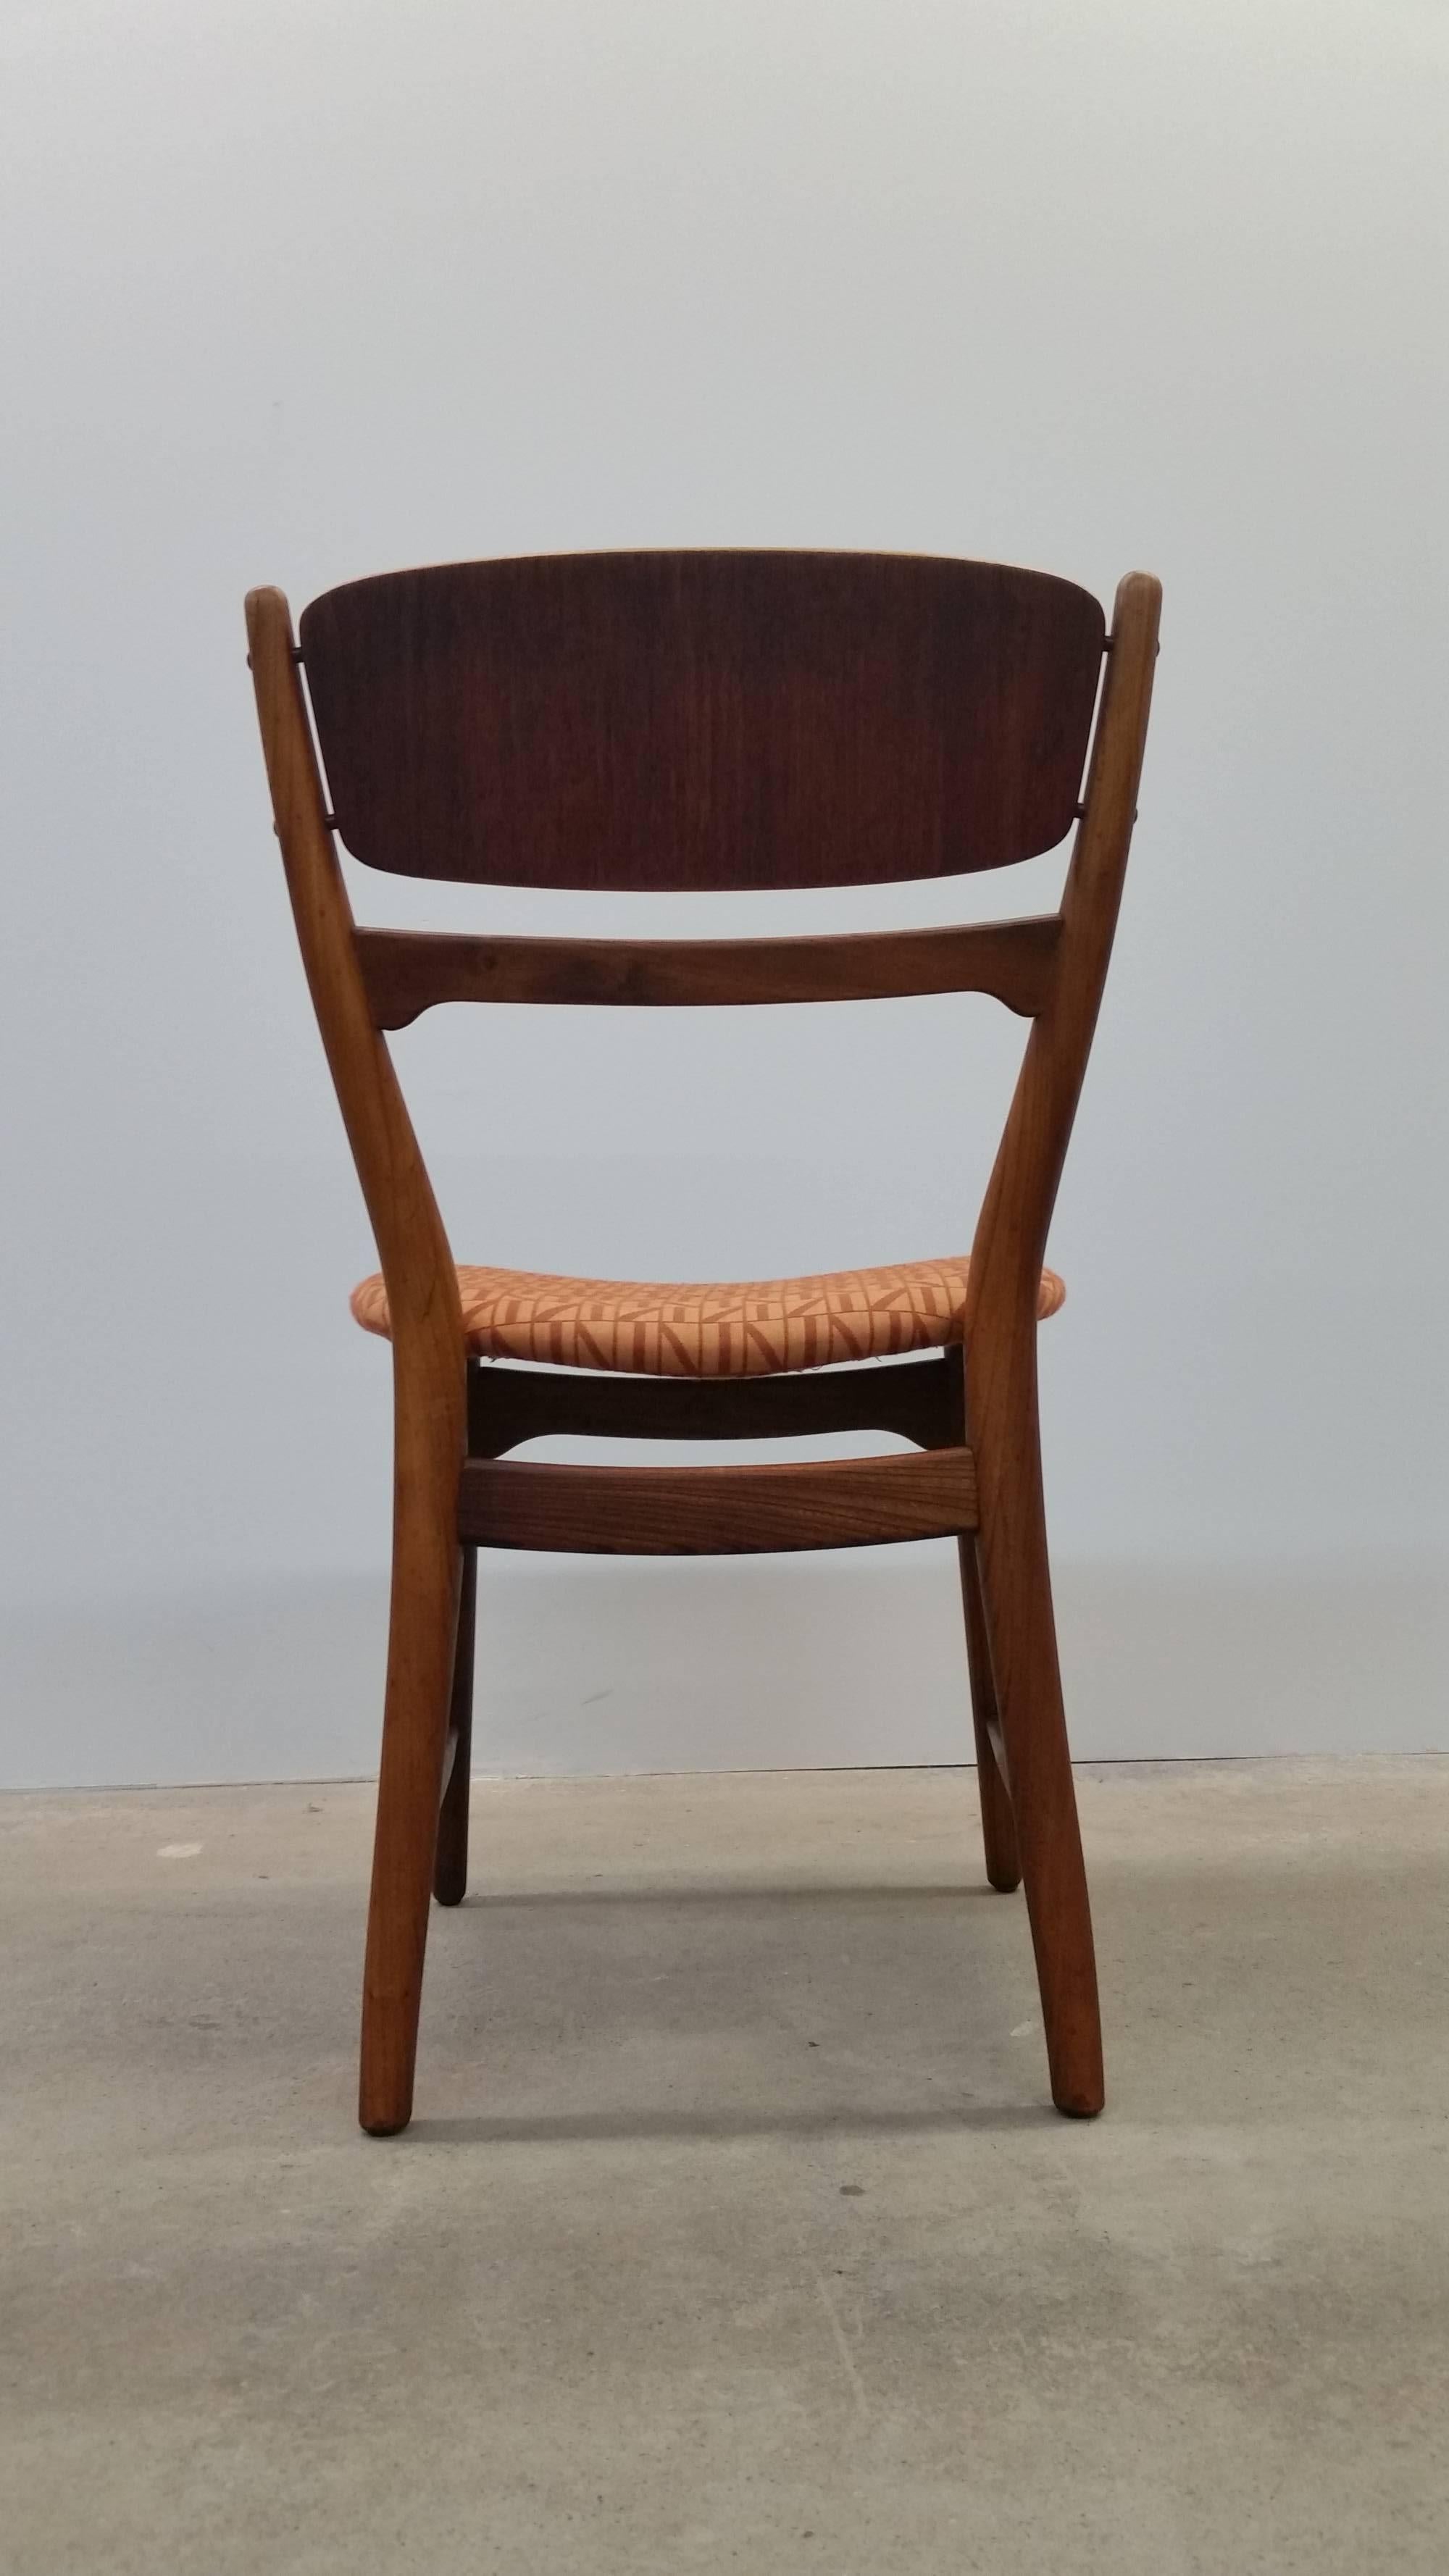 Set of Four Dining Chairs in Walnut and Teak, by Arne Wahl Iversen In Good Condition For Sale In Providence, RI